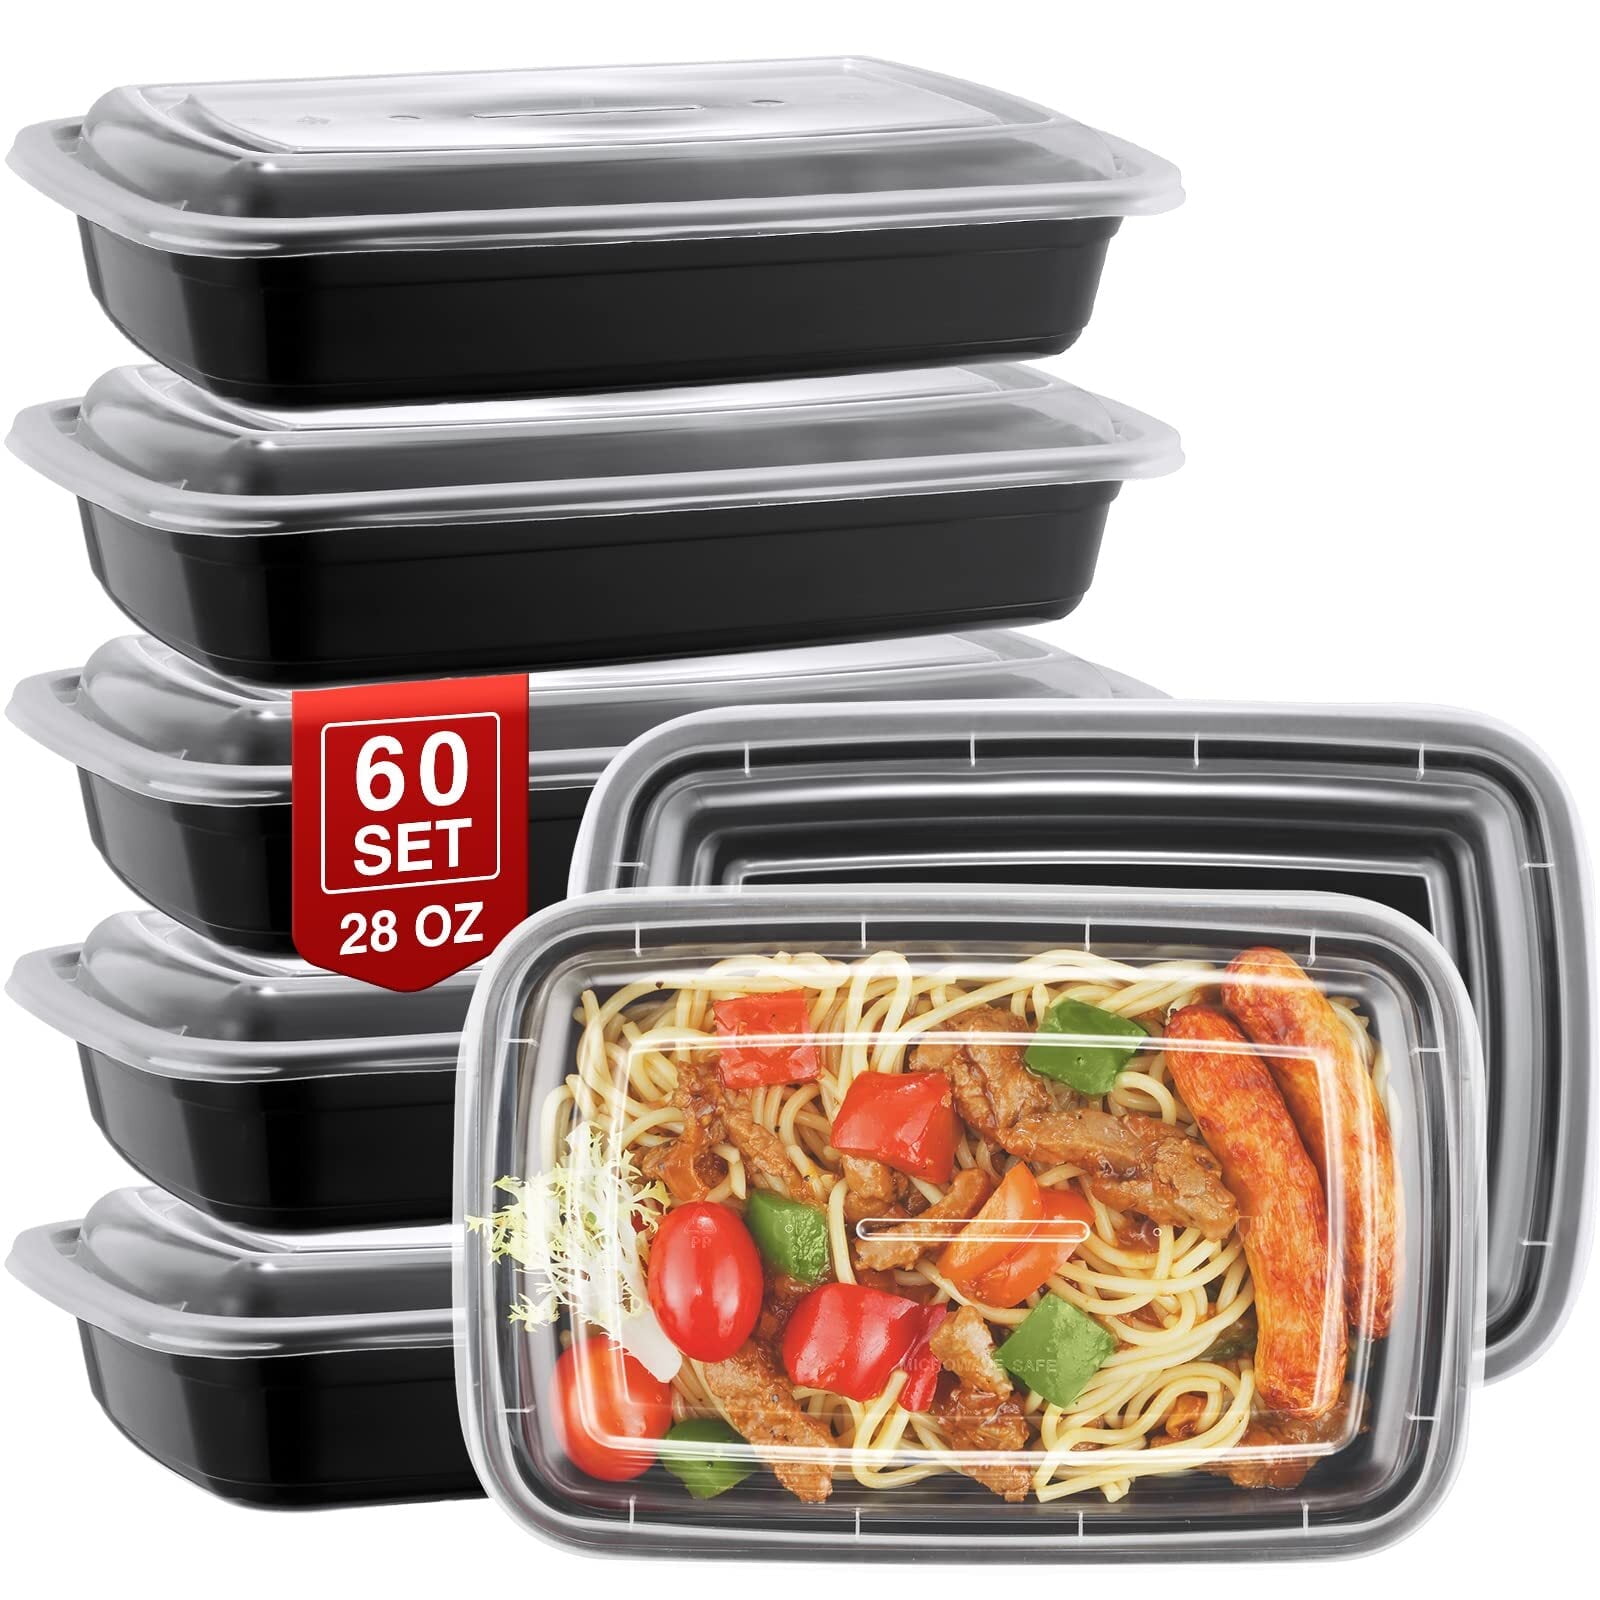 EcoQuality Black Sushi Trays with Lids 9.35 x 5.75 inch - Disposable Sushi  Container Packaging Box with Cover Carry Out Take Out Boxes Black Plastic  To Go Containers Entrees Appetizers Desserts (300) 